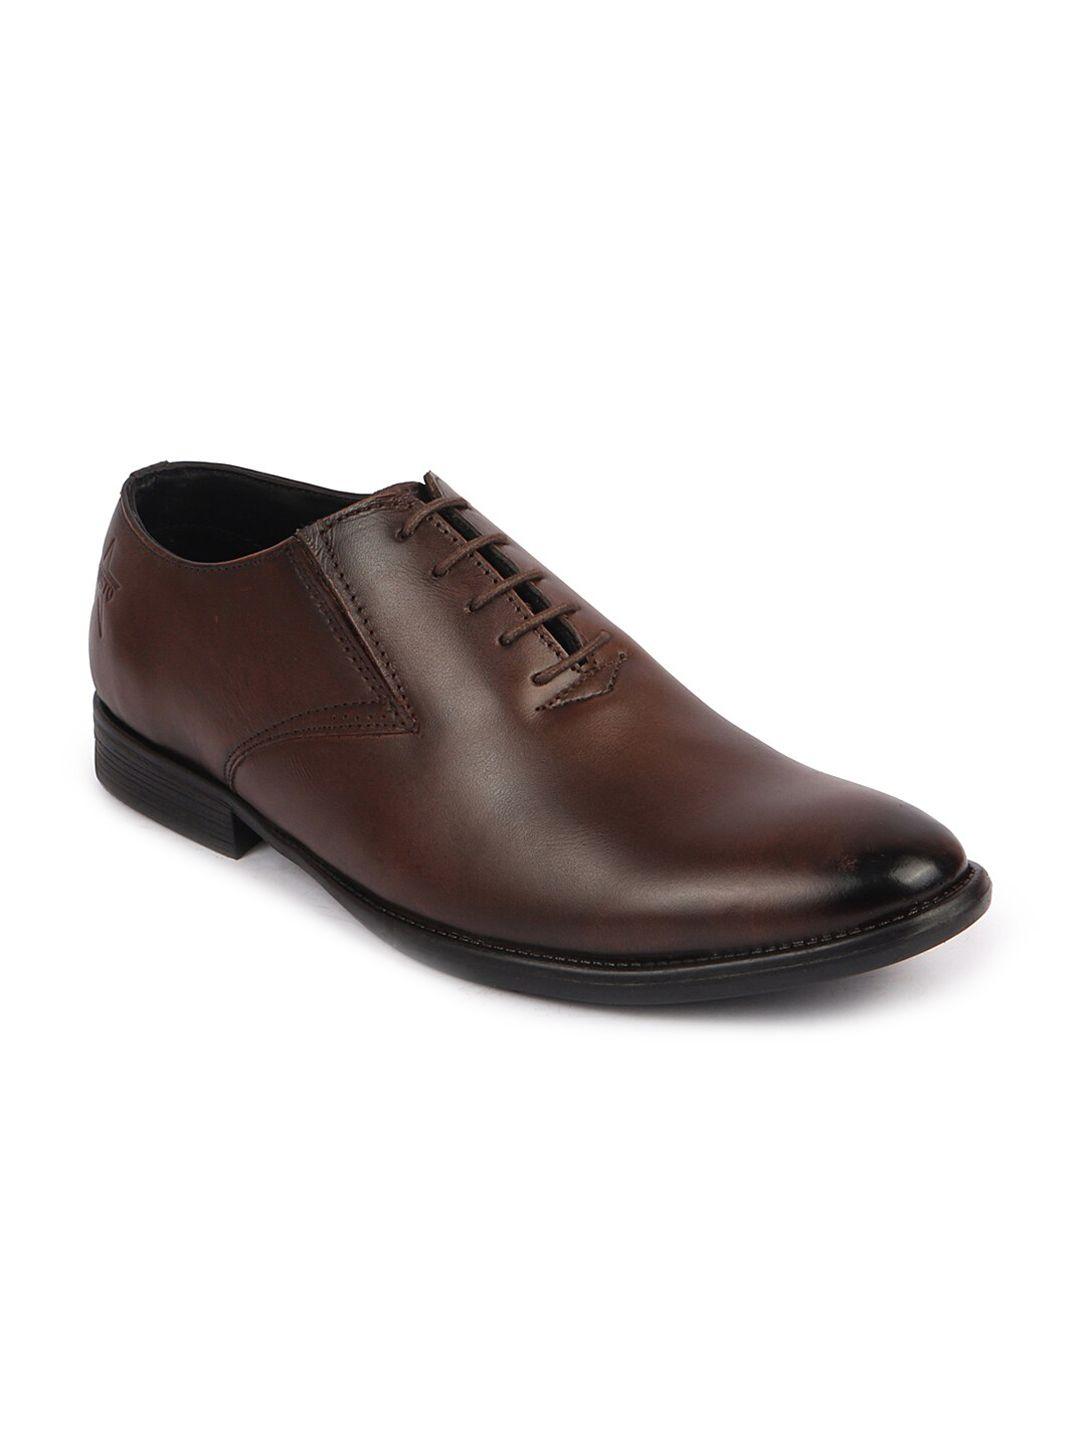 FAUSTO Men Leather Formal Oxfords